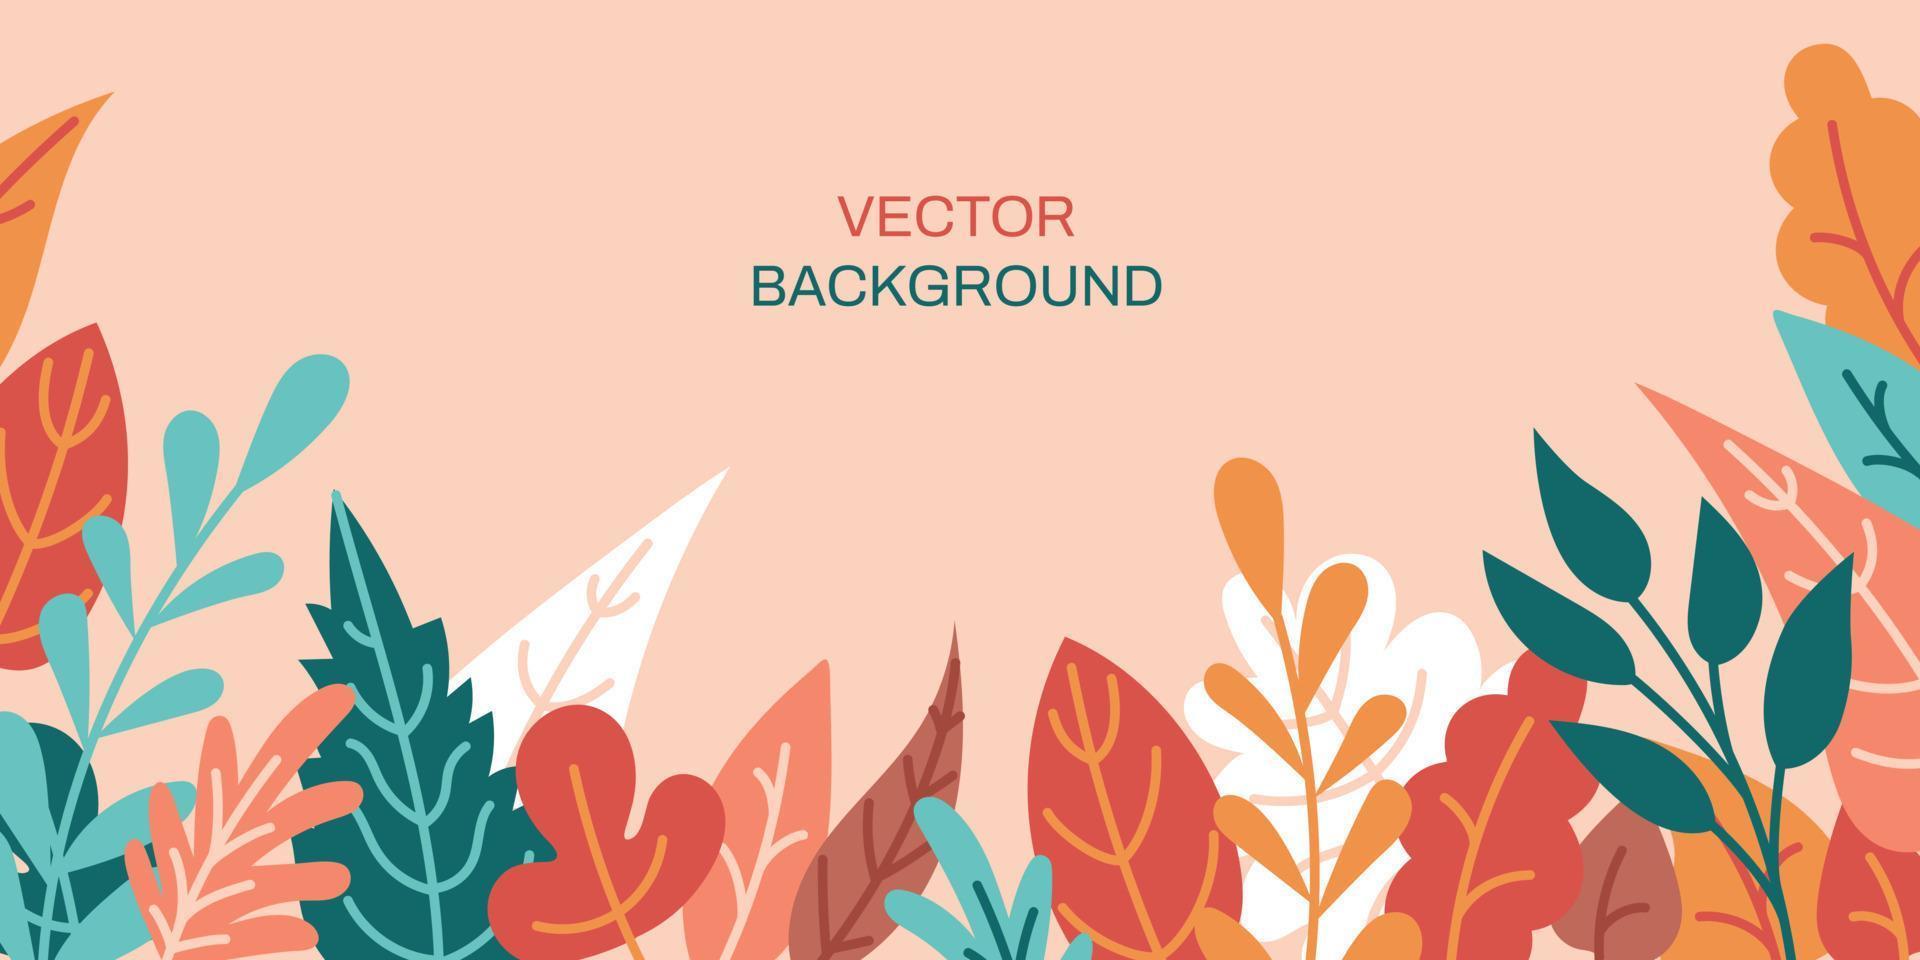 Vector horizontal abstract background with autumn colorful leaves